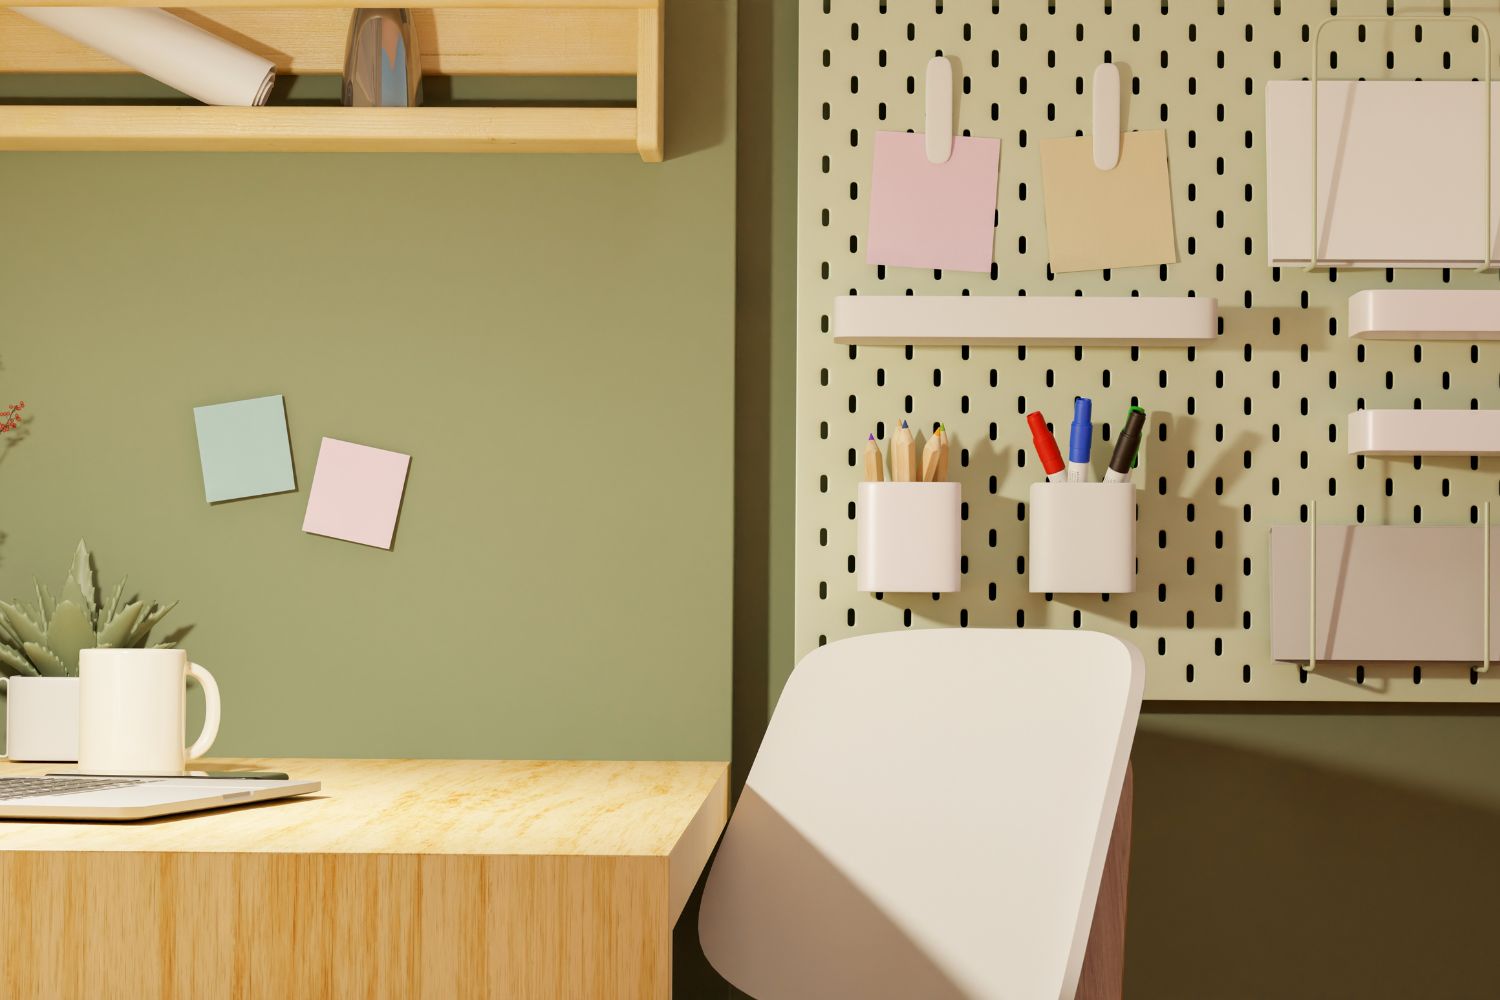 Desk with chair and peg board organizer